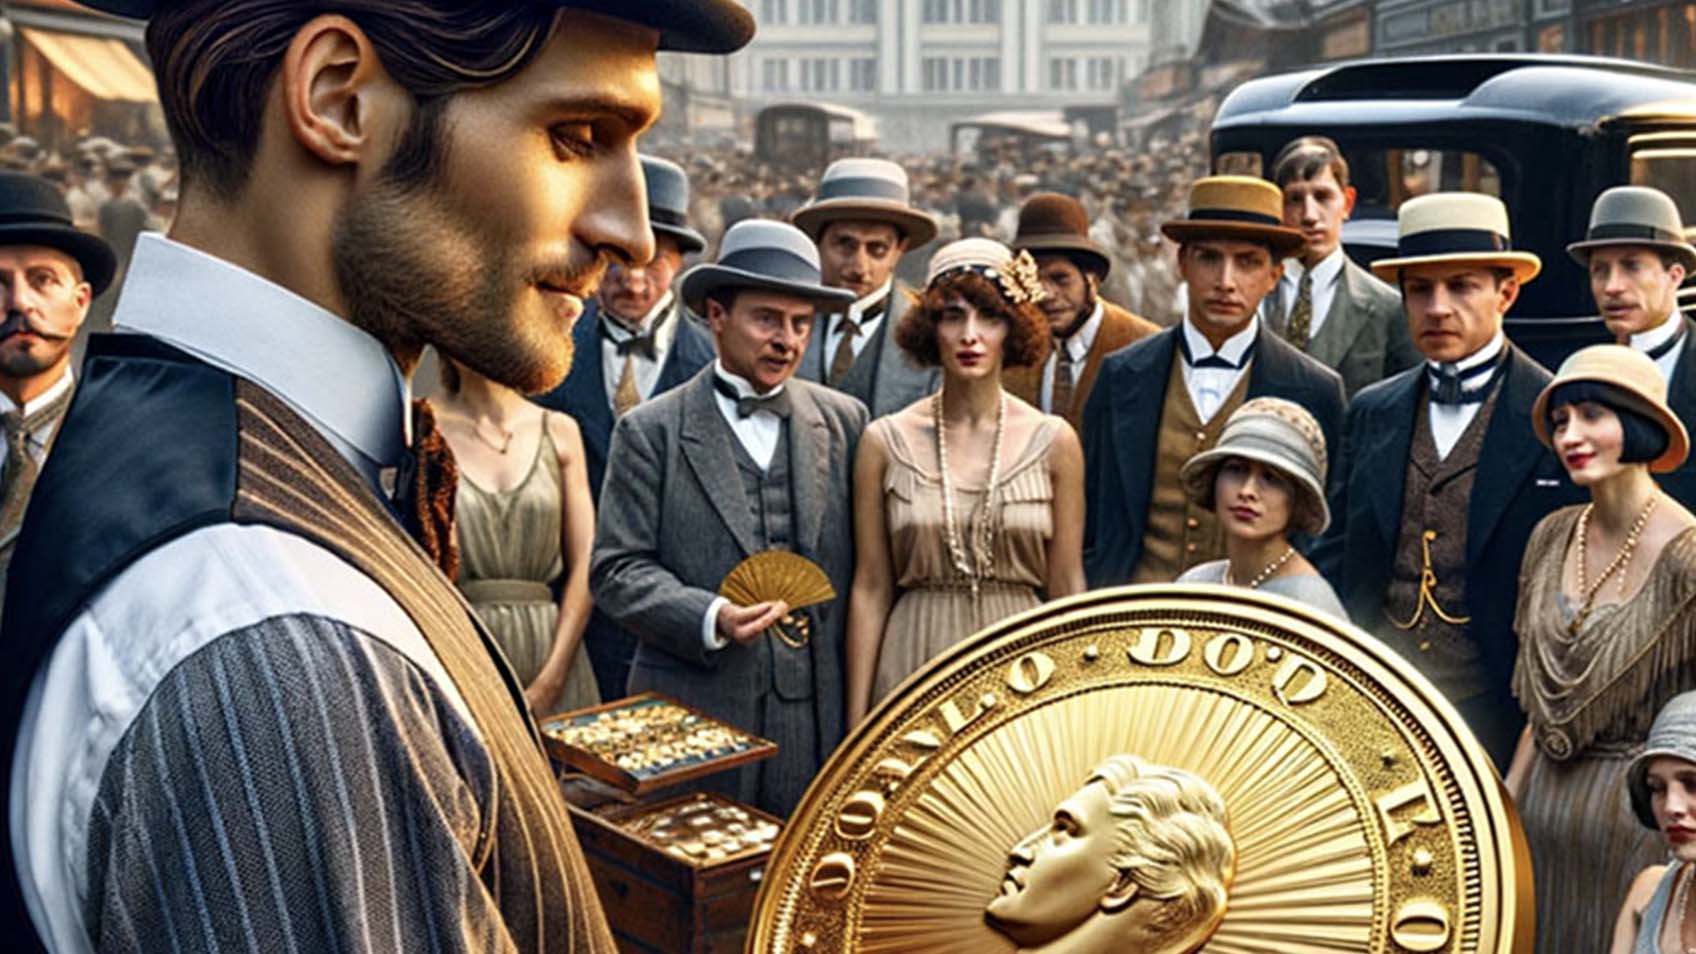 Man holding a large gold coin surrounded by spectators